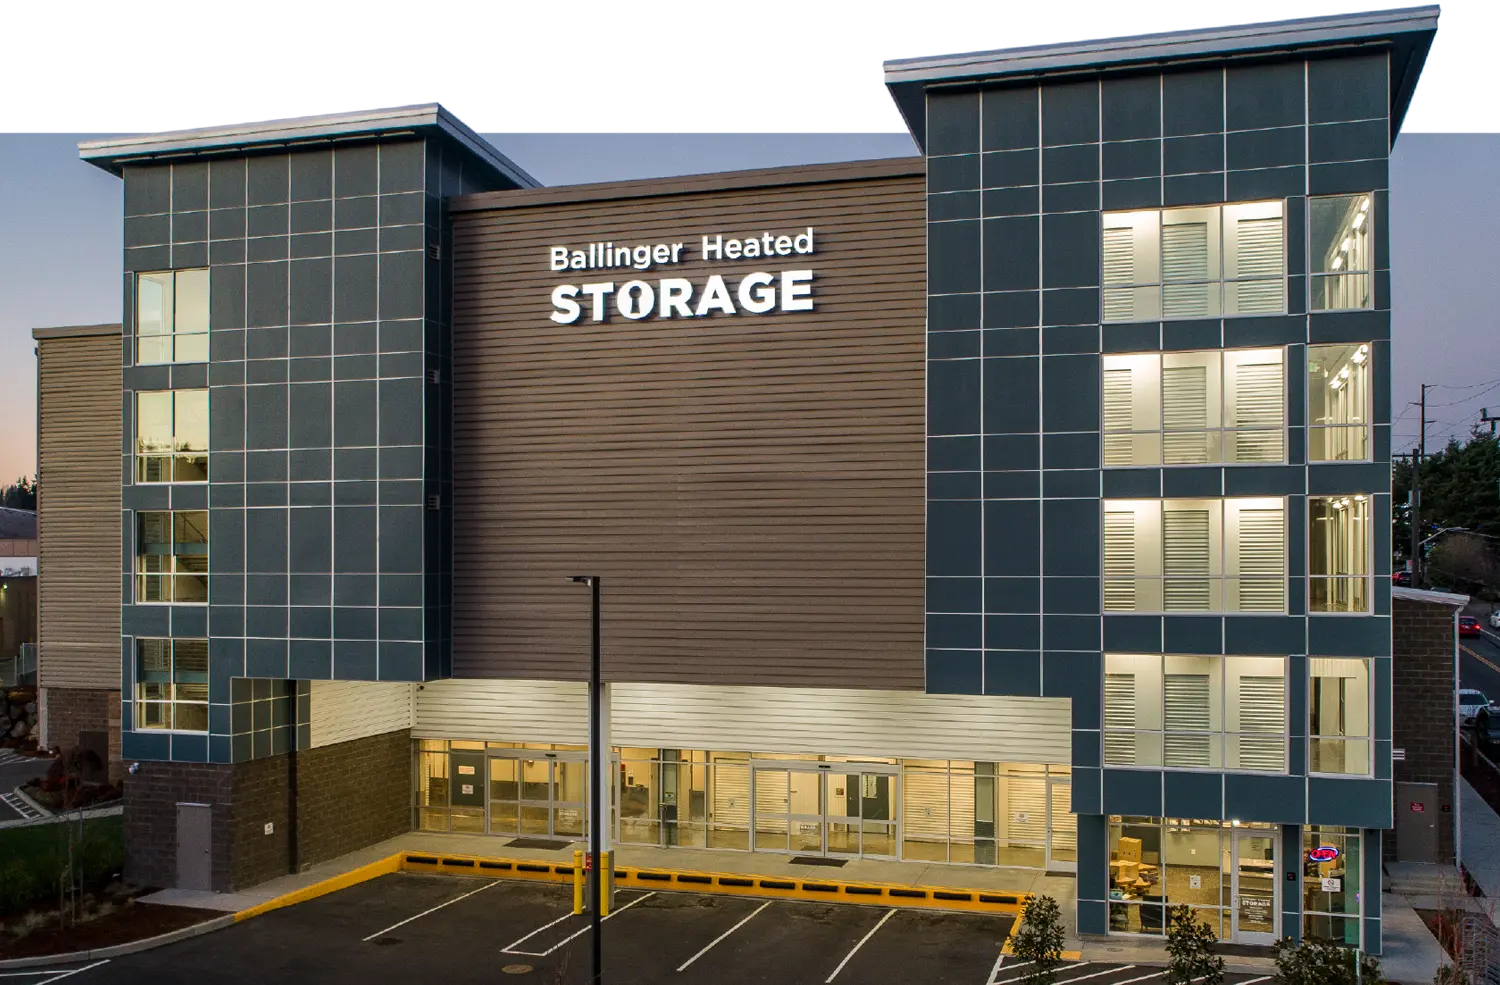 closer mid angle view of the multi-storied Ballinger Heated Storage facility